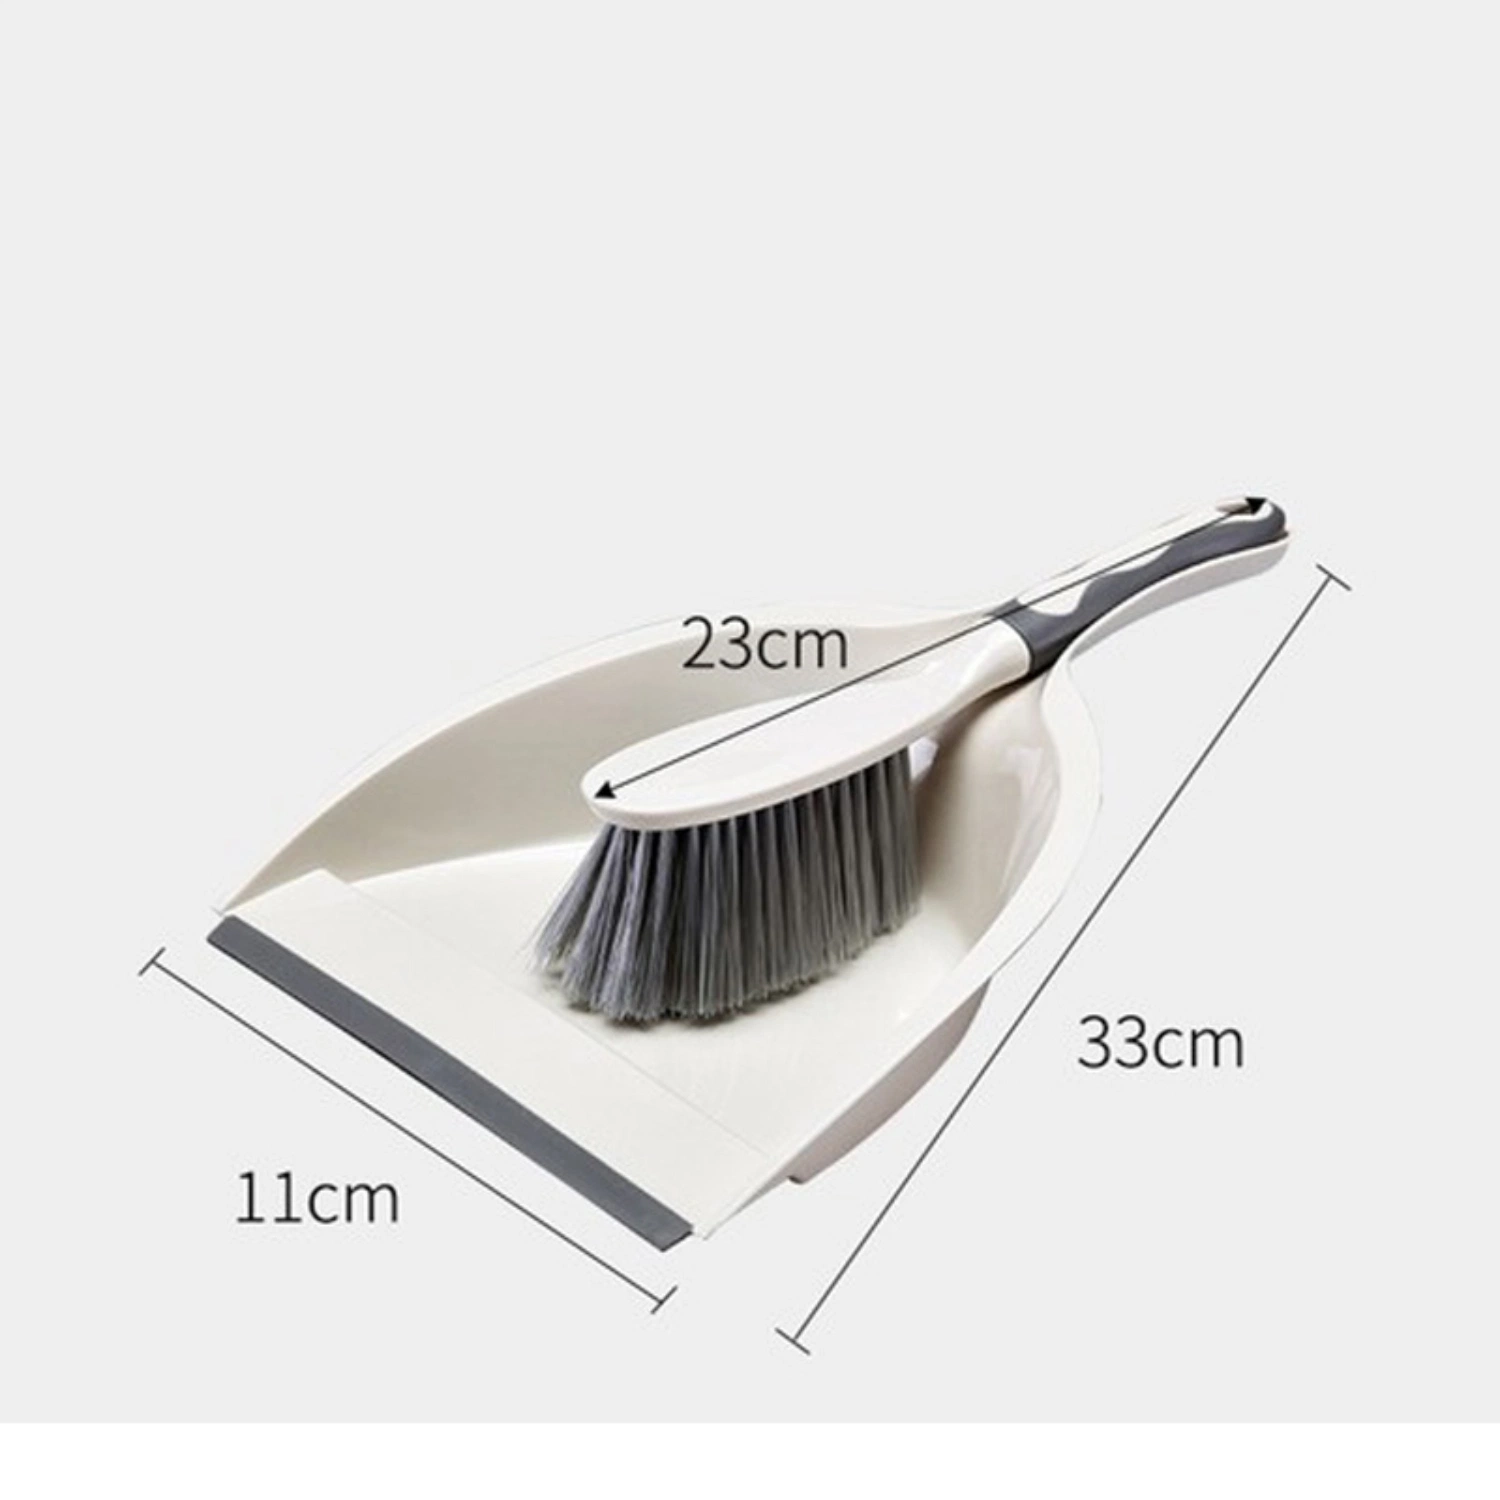 Auto Dustpan and Brush Set Small Cleaning Broom for Cars Wyz11953